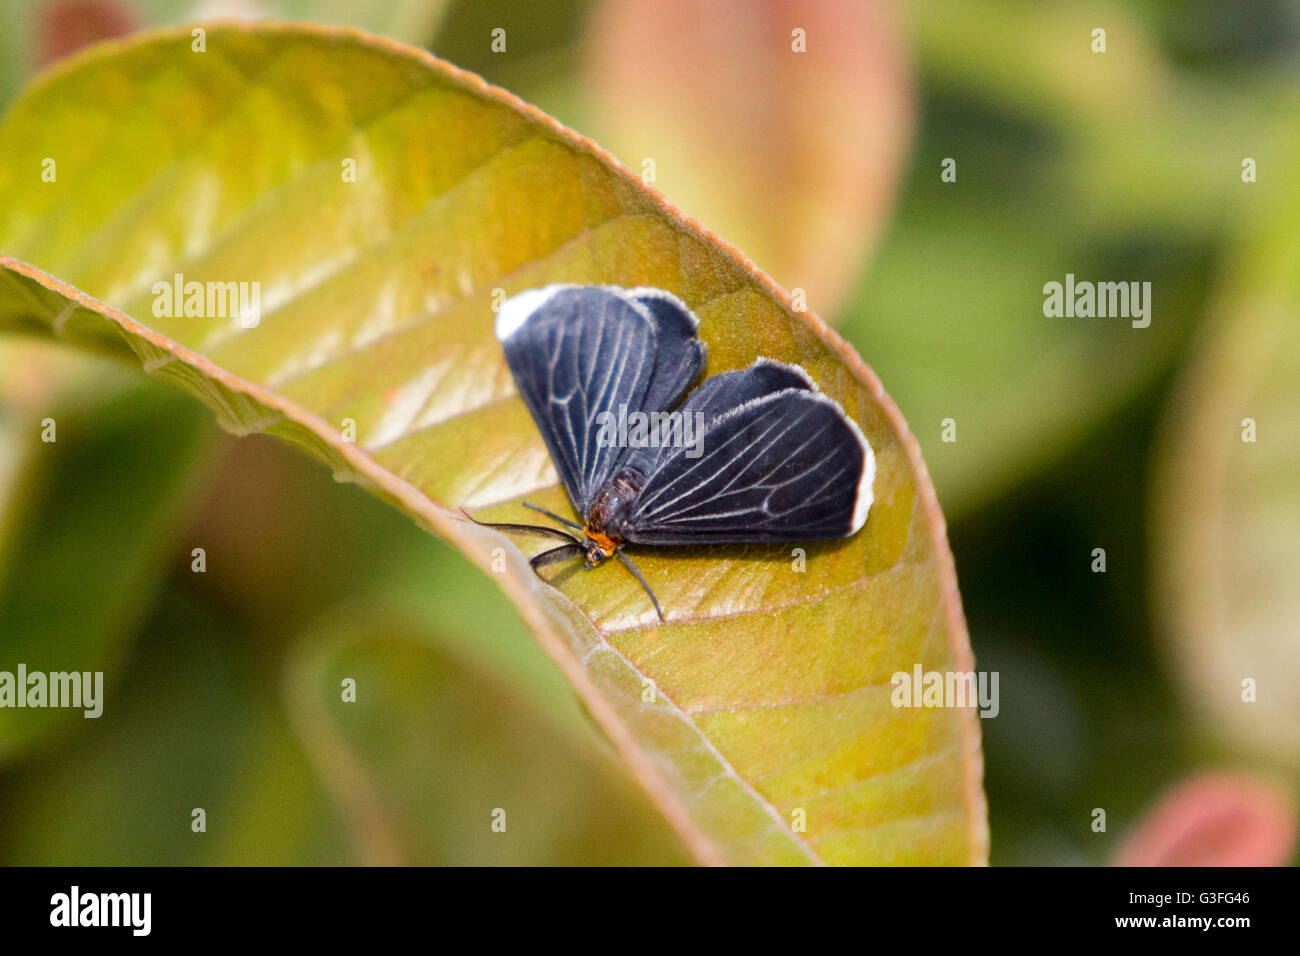 Asuncion, Paraguay. 10th June, 2016. White-tipped black or snowbush spanworm (Melanchroia chephise) moth, rests on guava tree leaf, is seen during sunny day in Asuncion, Paraguay. Credit: Andre M. Chang/Alamy Live News Stock Photo